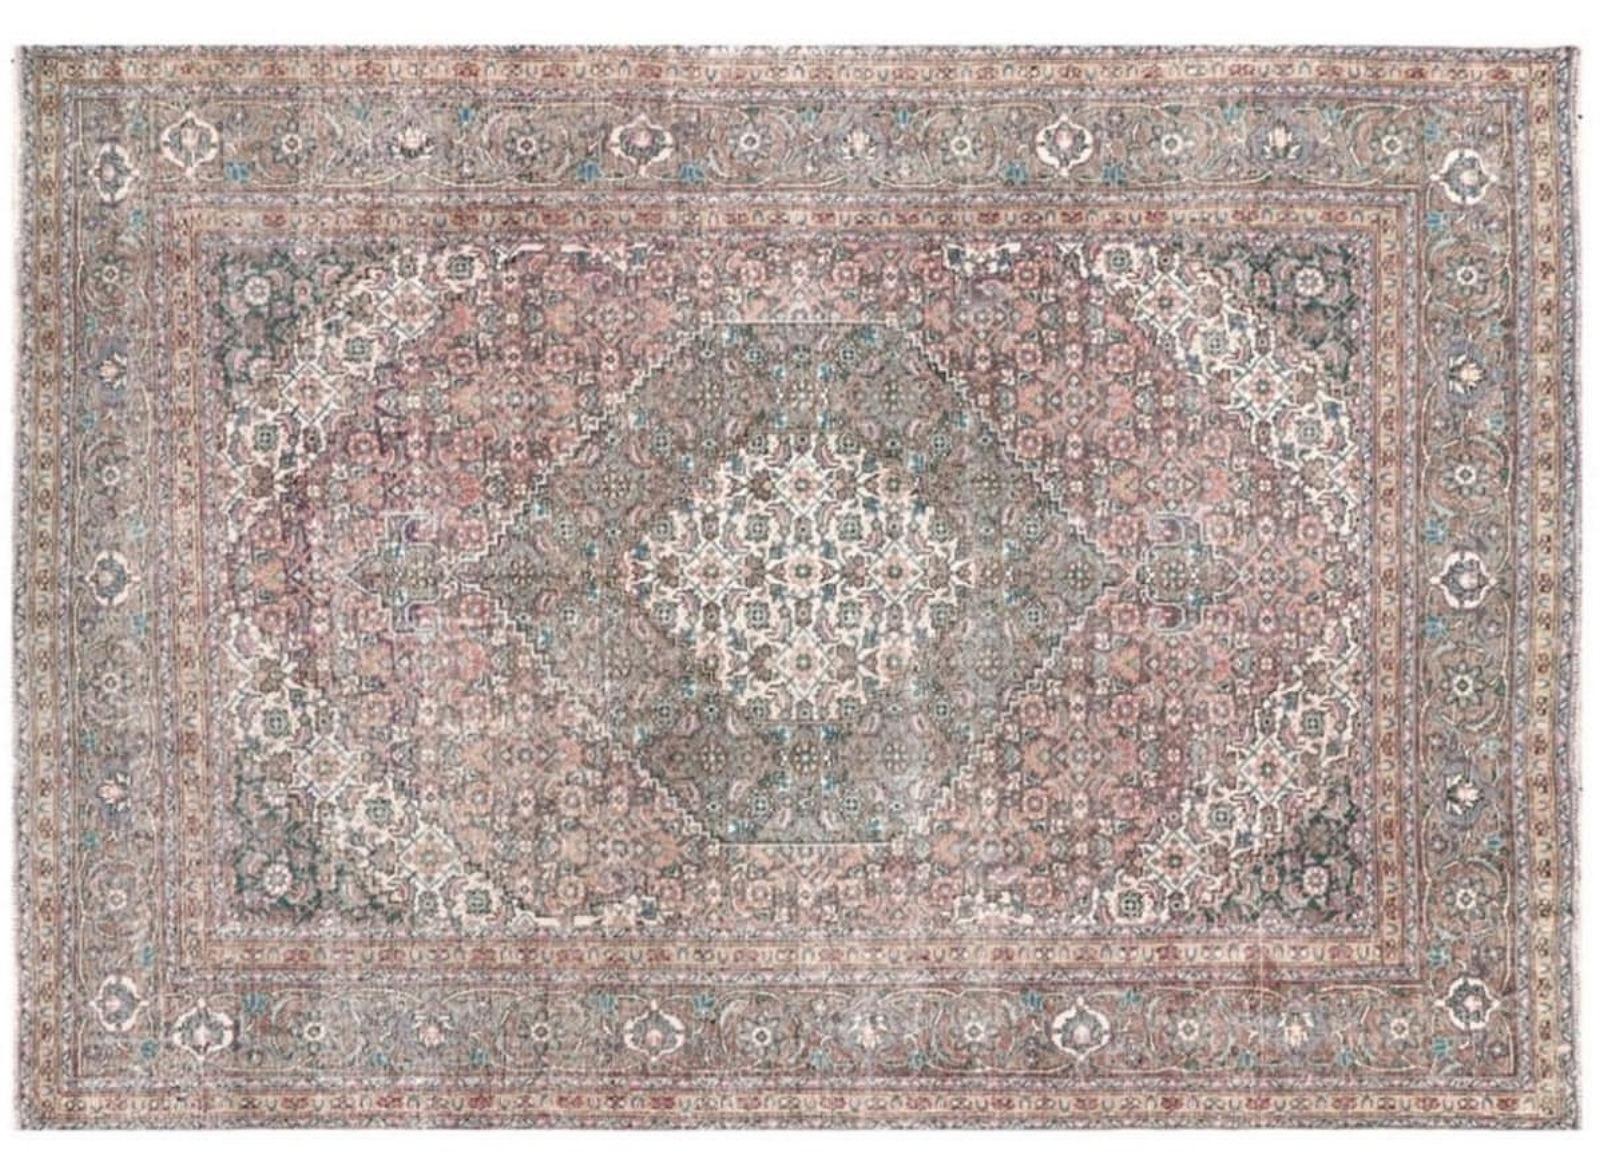  Tabriz Vintage Rug 8x12 ft Hand Knotted Room Size Wool Muted Colors 360x250 cm For Sale 1